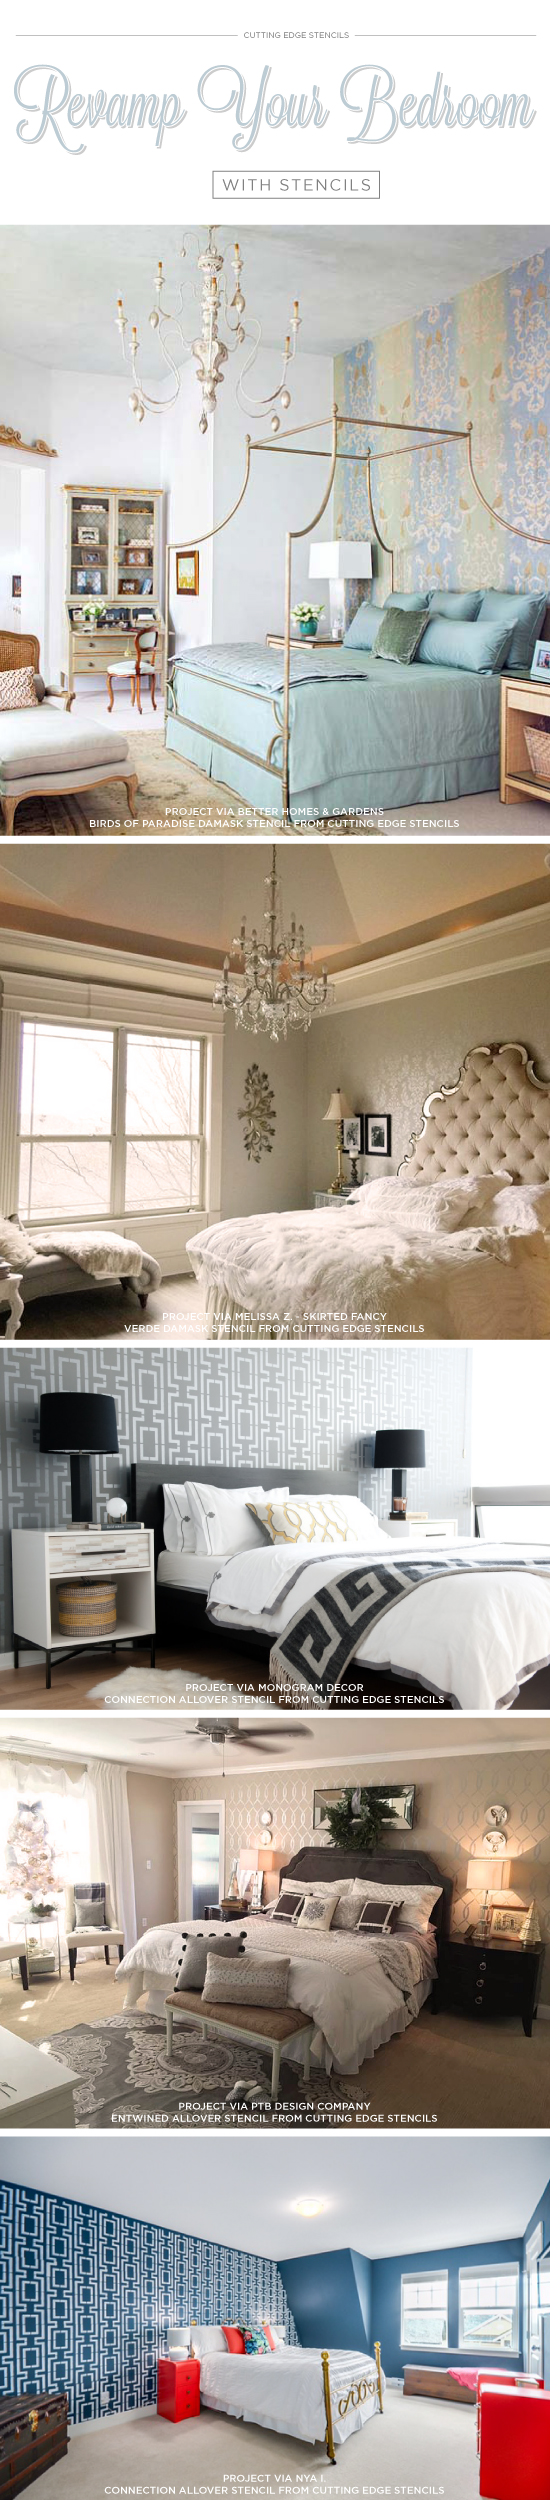 Cutting Edge Stencils shares bedroom decorating ideas featuring DIY stenciled accent walls. http://www.cuttingedgestencils.com/wall-stencils-stencil-designs.html